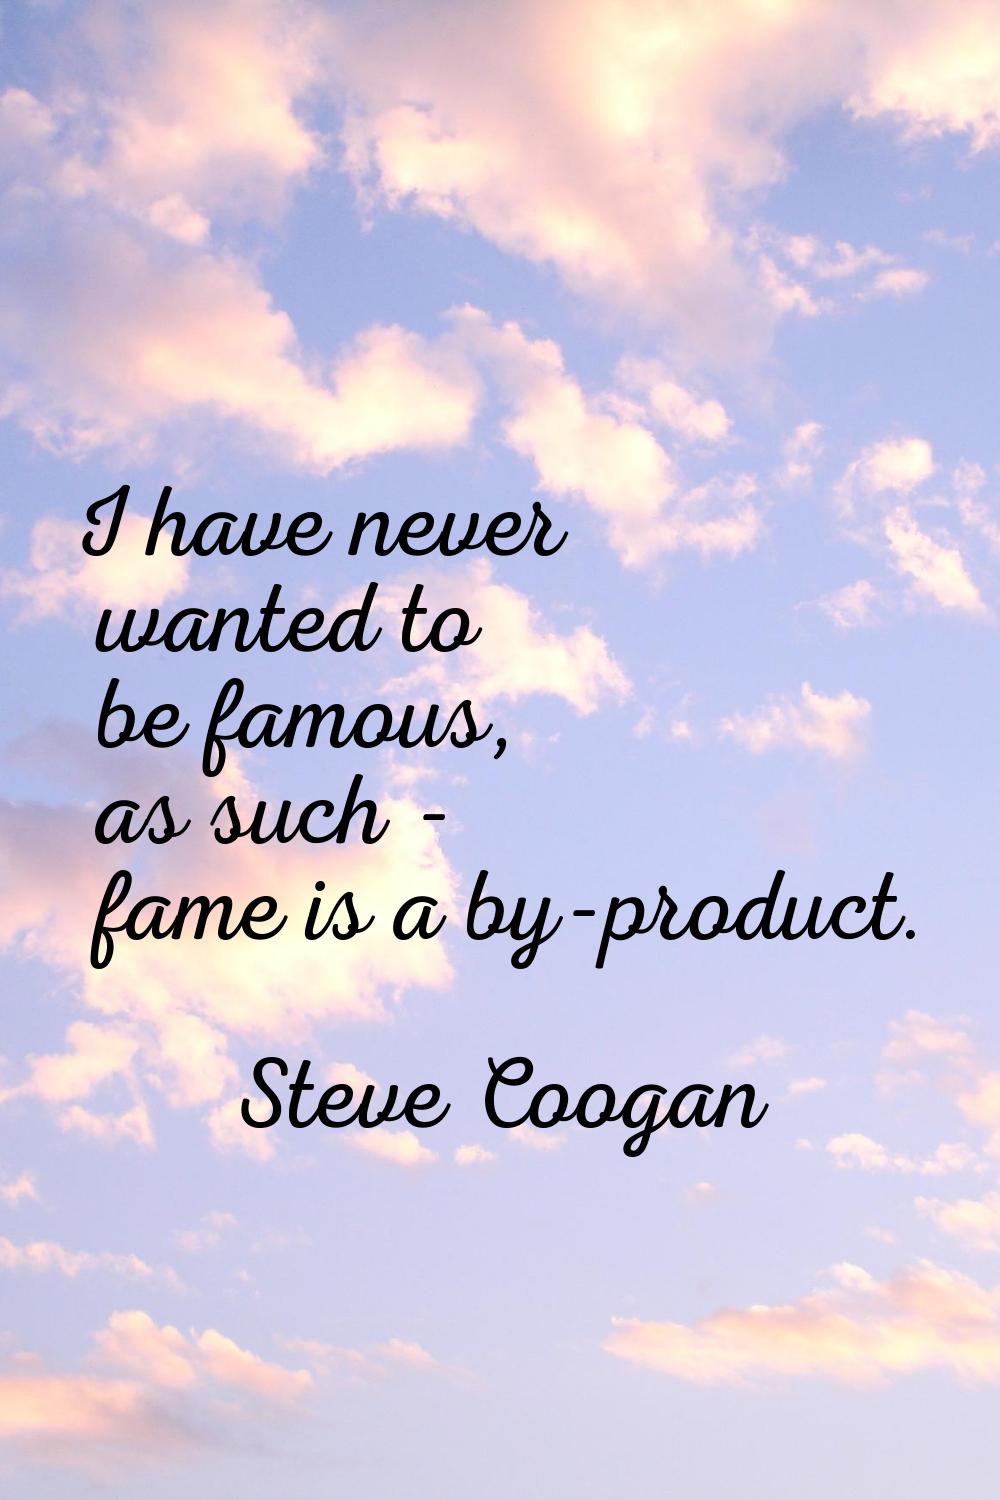 I have never wanted to be famous, as such - fame is a by-product.